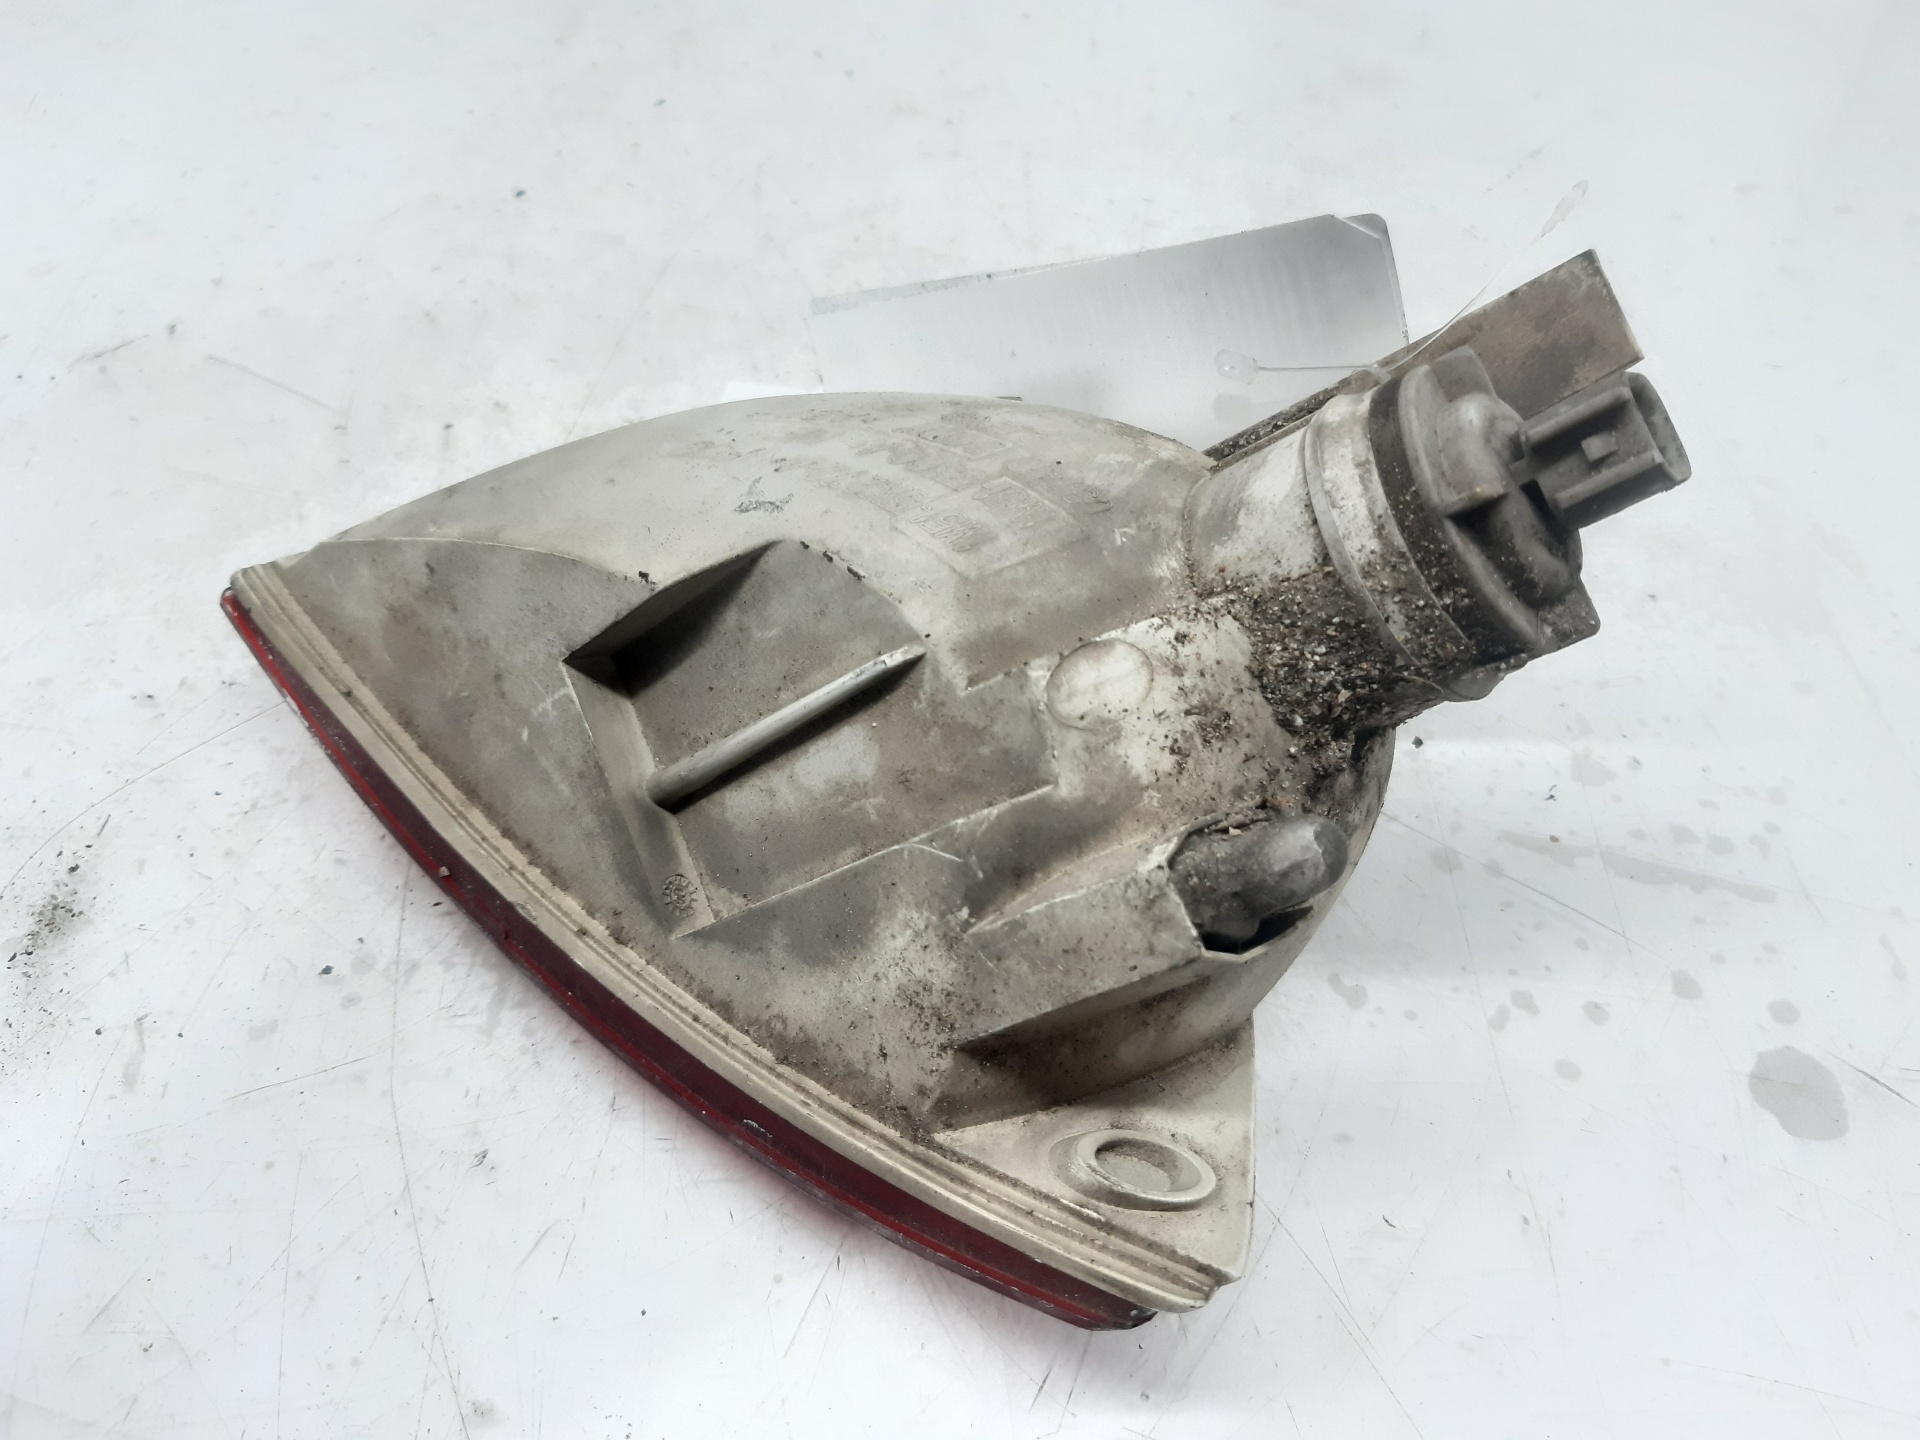 FORD Focus 1 generation (1998-2010) Other Body Parts 1M5115K272A 24129154